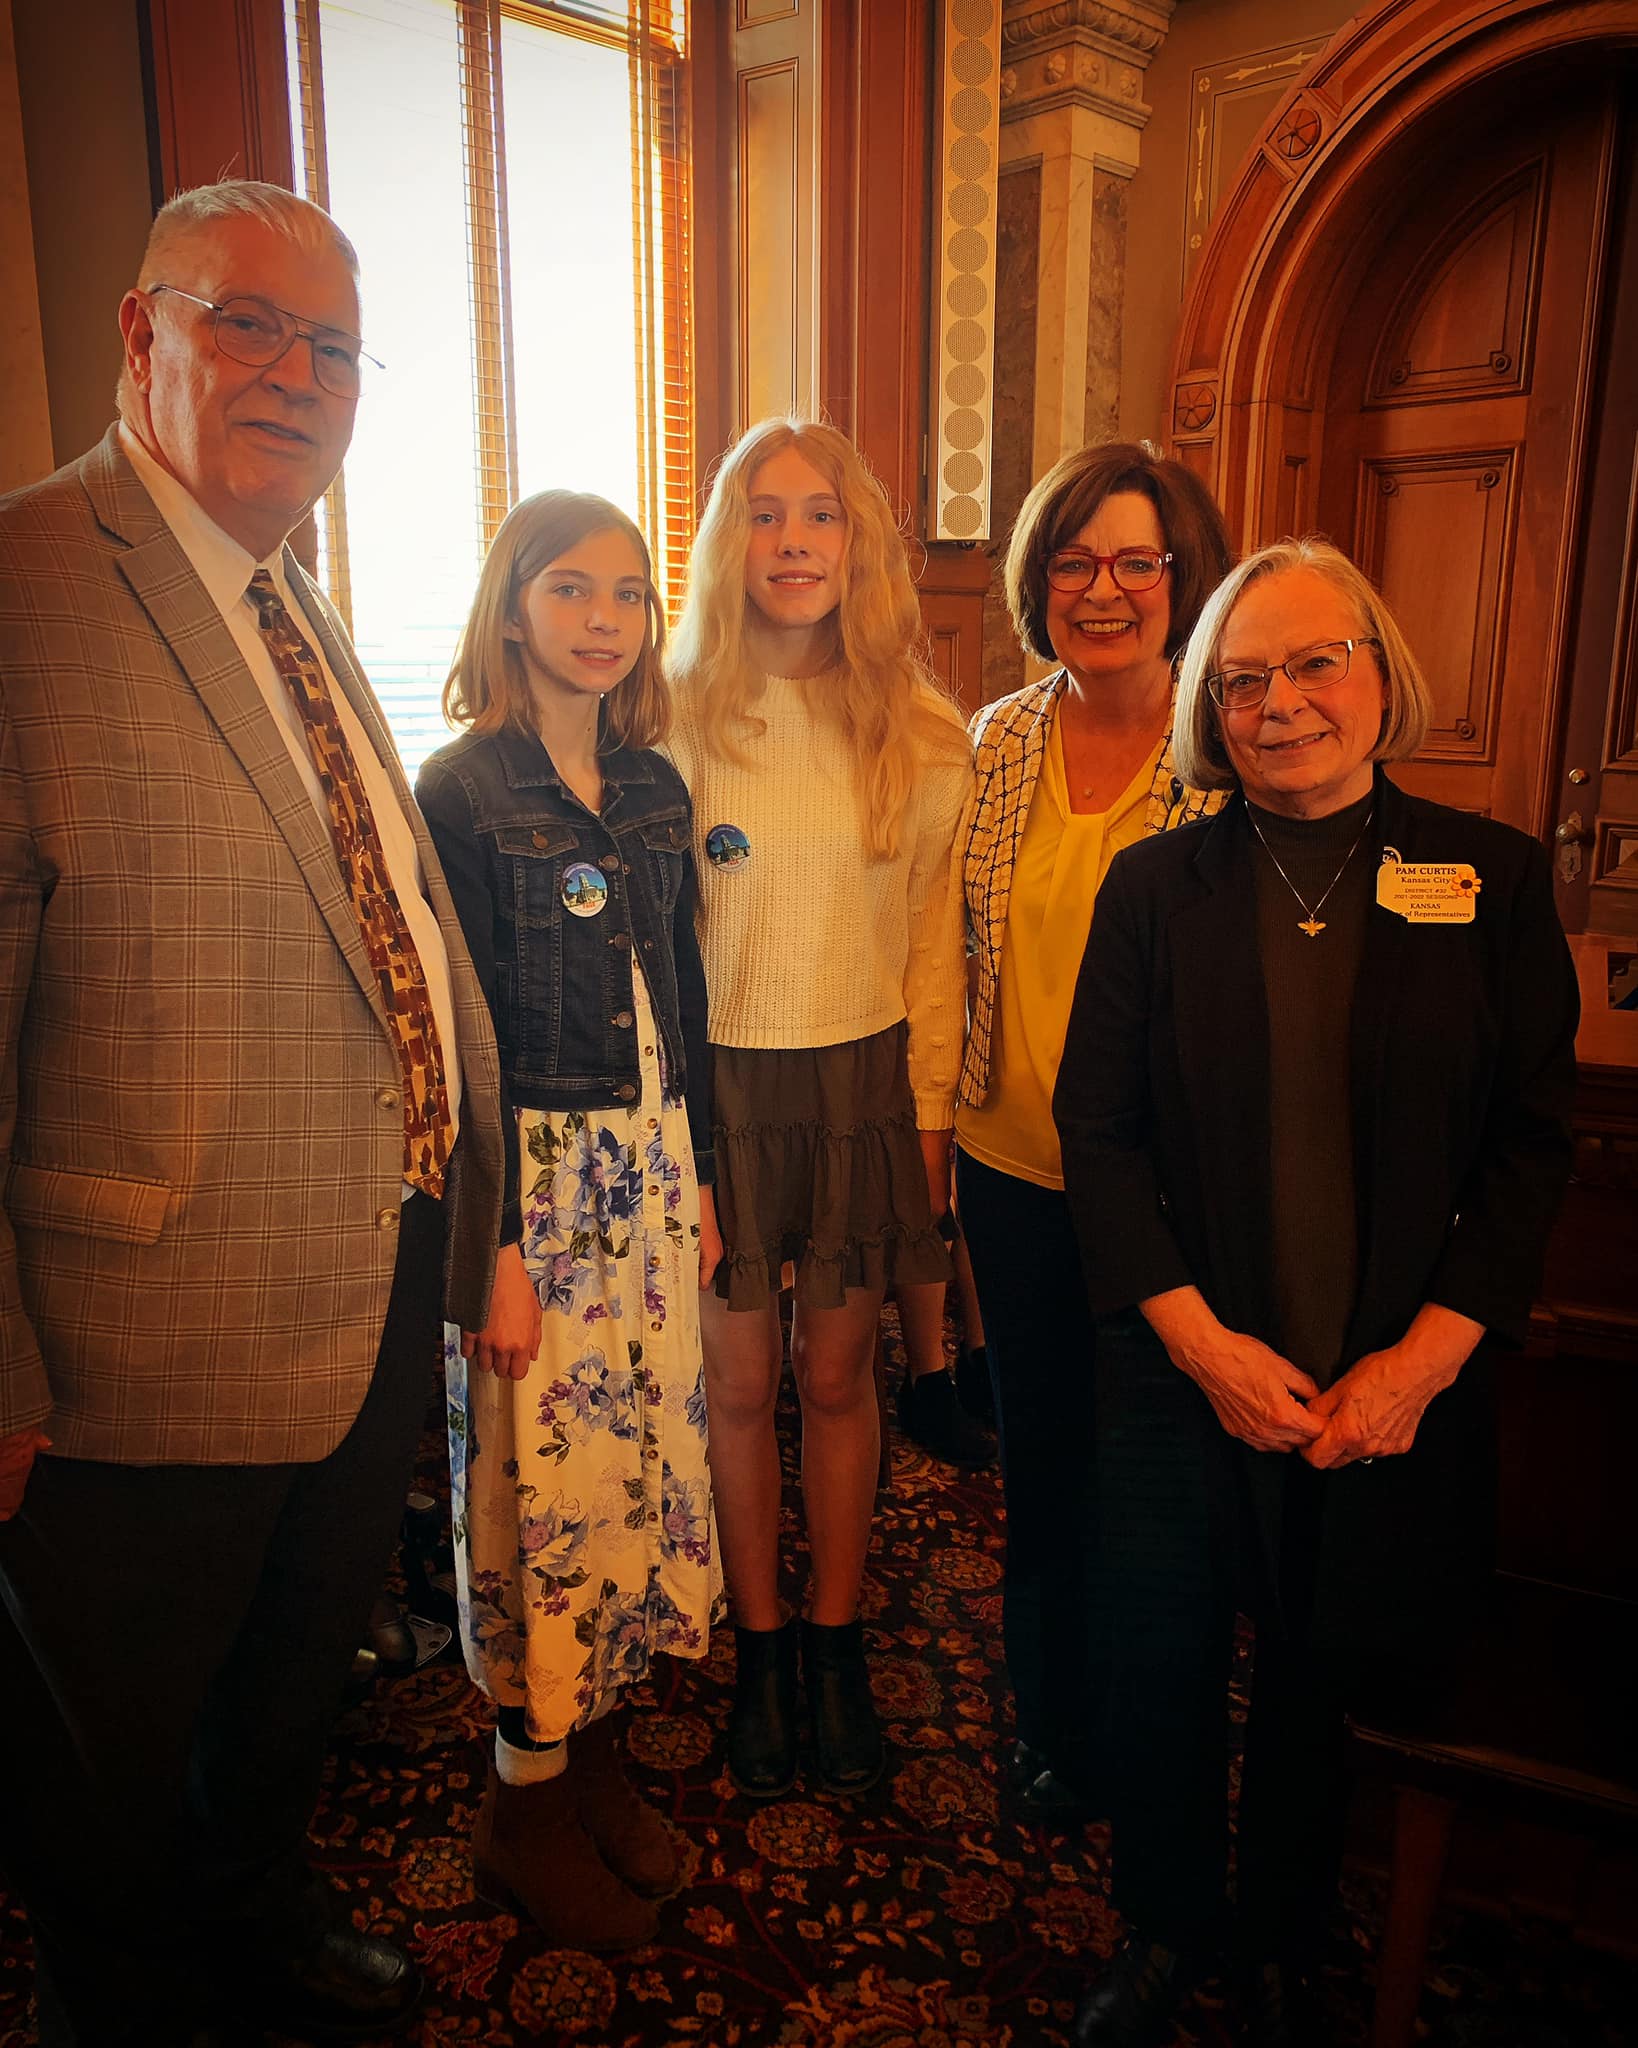 Our friend (and former KS Rep) Mary Jane Mikesic’s granddaughters, Bethany and Grace, were serving as Pages for their grandpa Rep. Tim Johnson. It was so nice to meet them!